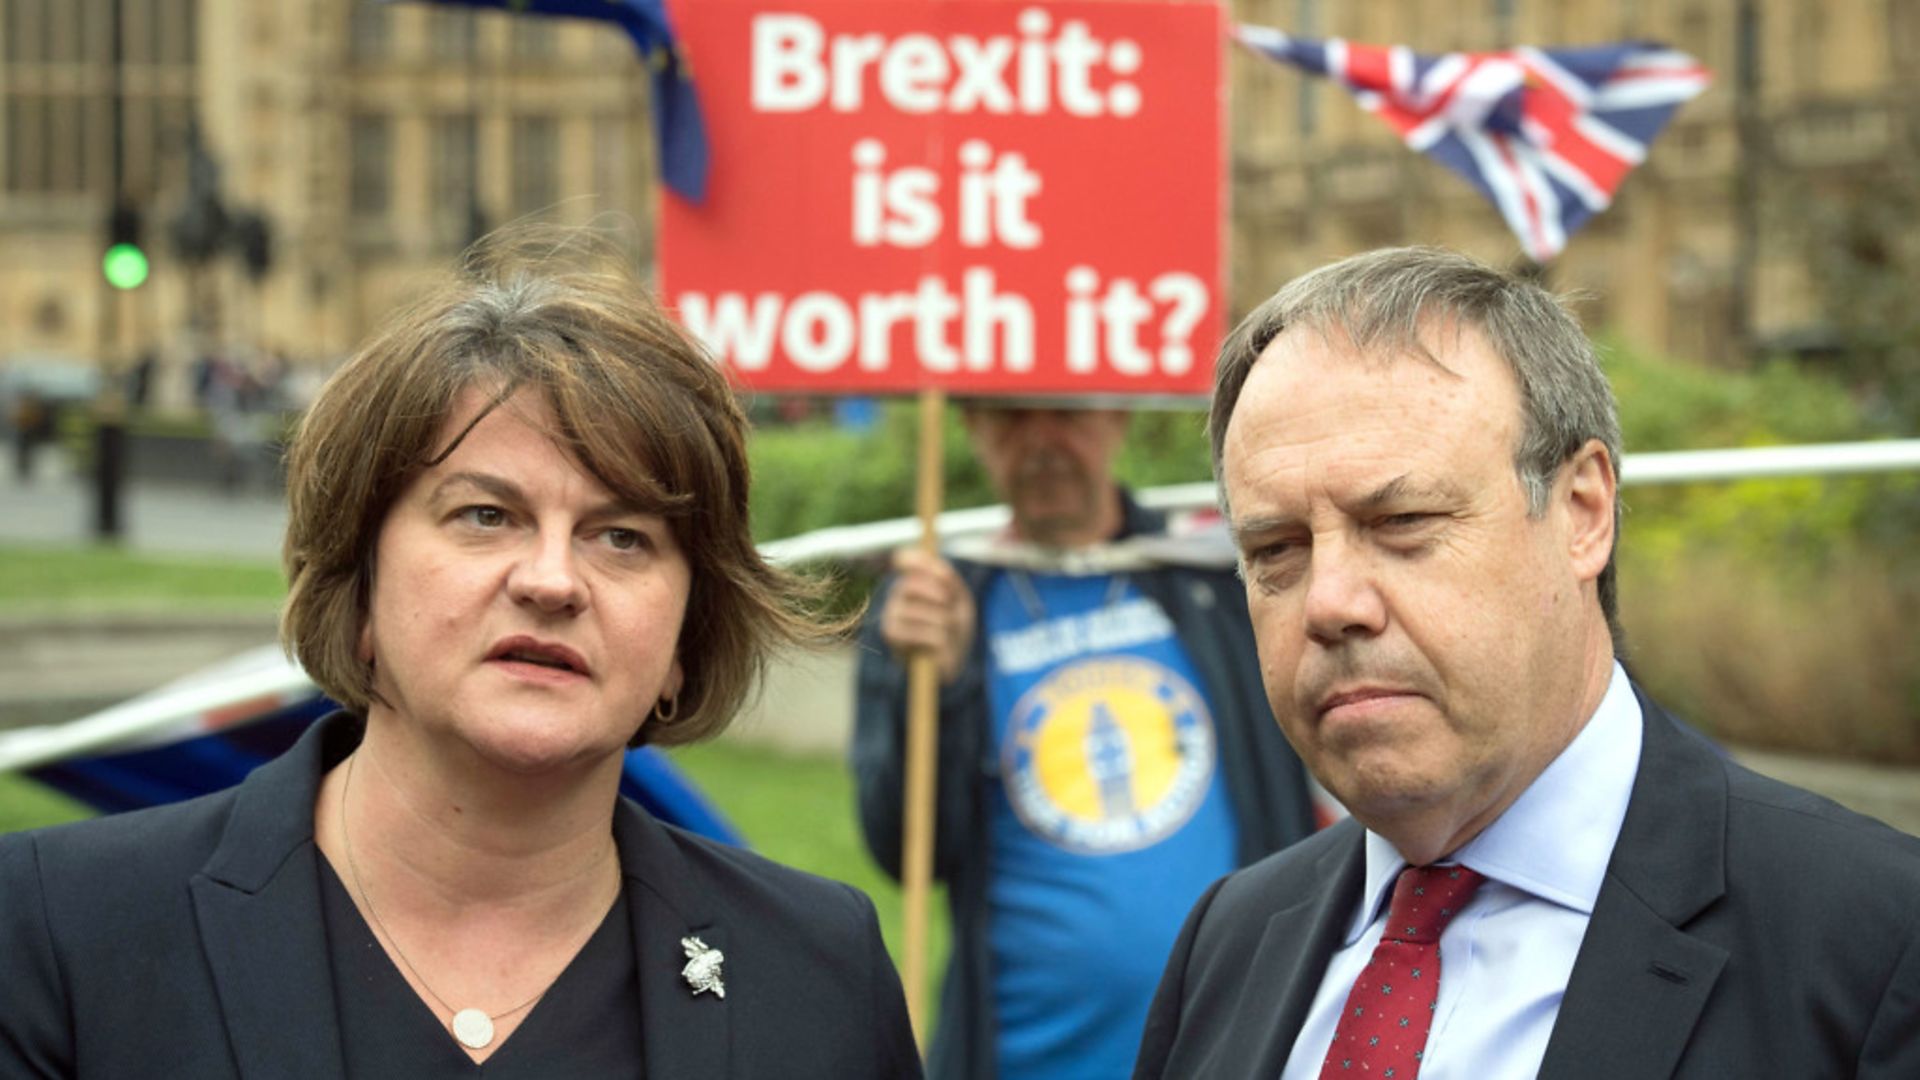 DUP leader Arlene Foster and deputy leader Nigel Dodds pictured with anti-Brexit campaigner Steve Bray - Credit: PA Wire/PA Images